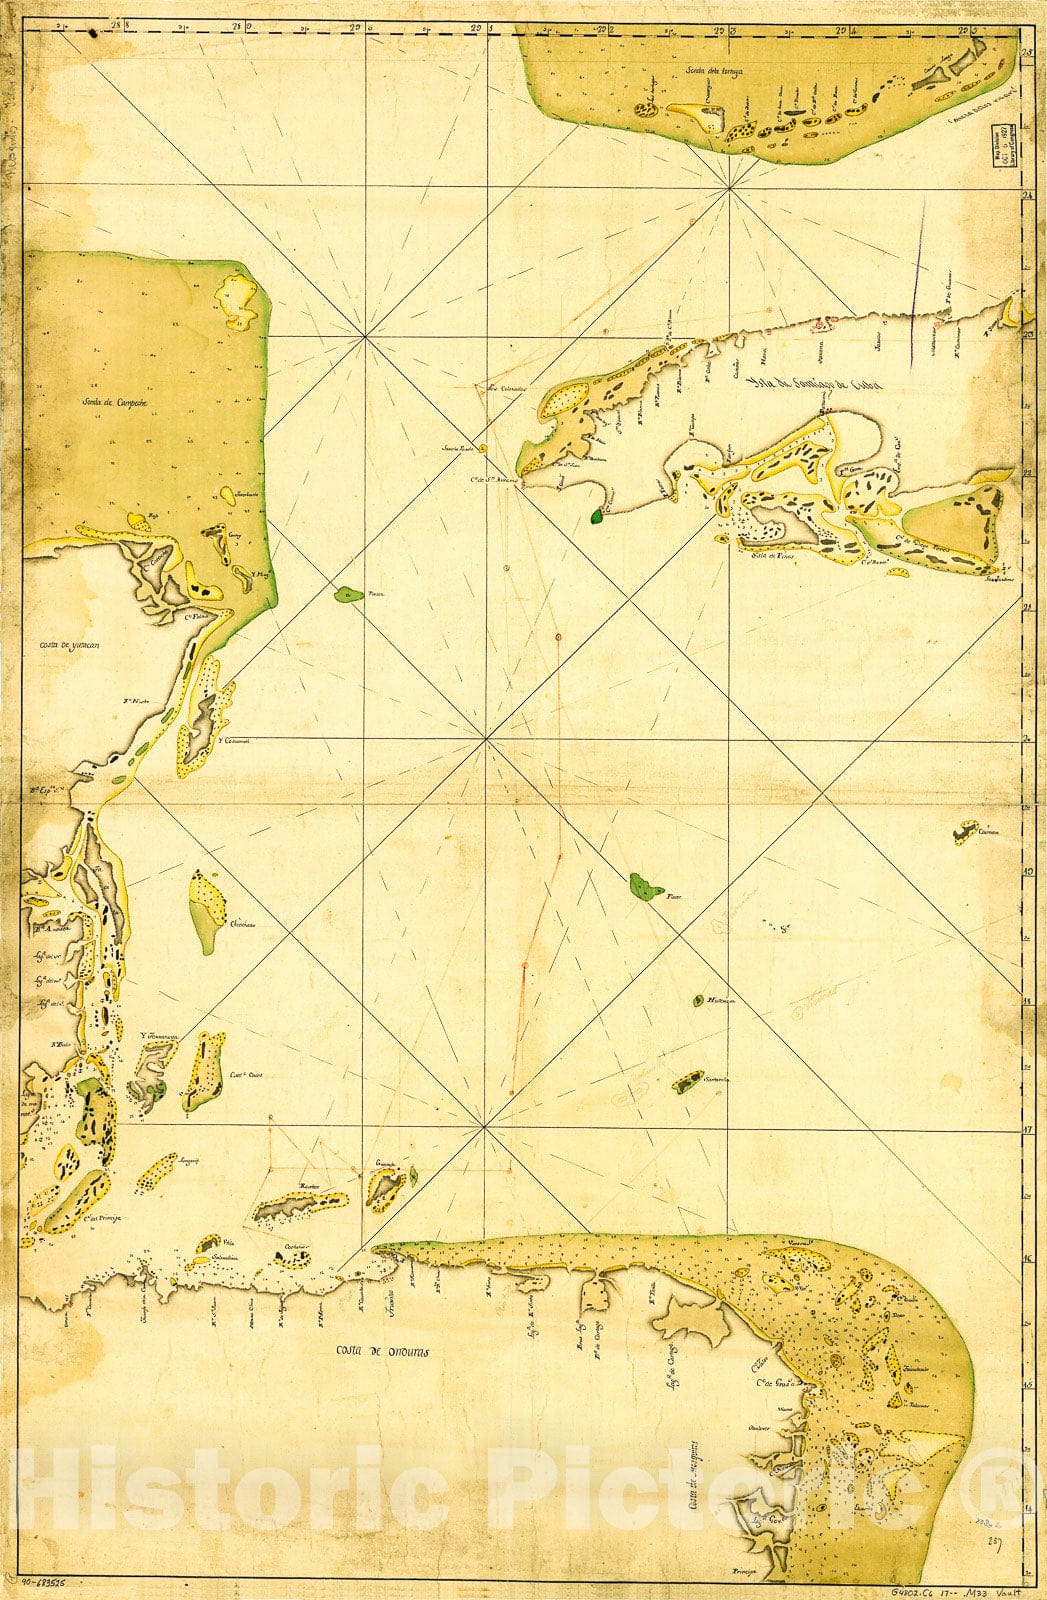 Historic 1700 Map - Map Showing Portion of The Caribbean Sea from Florida Keys to Nicaragua